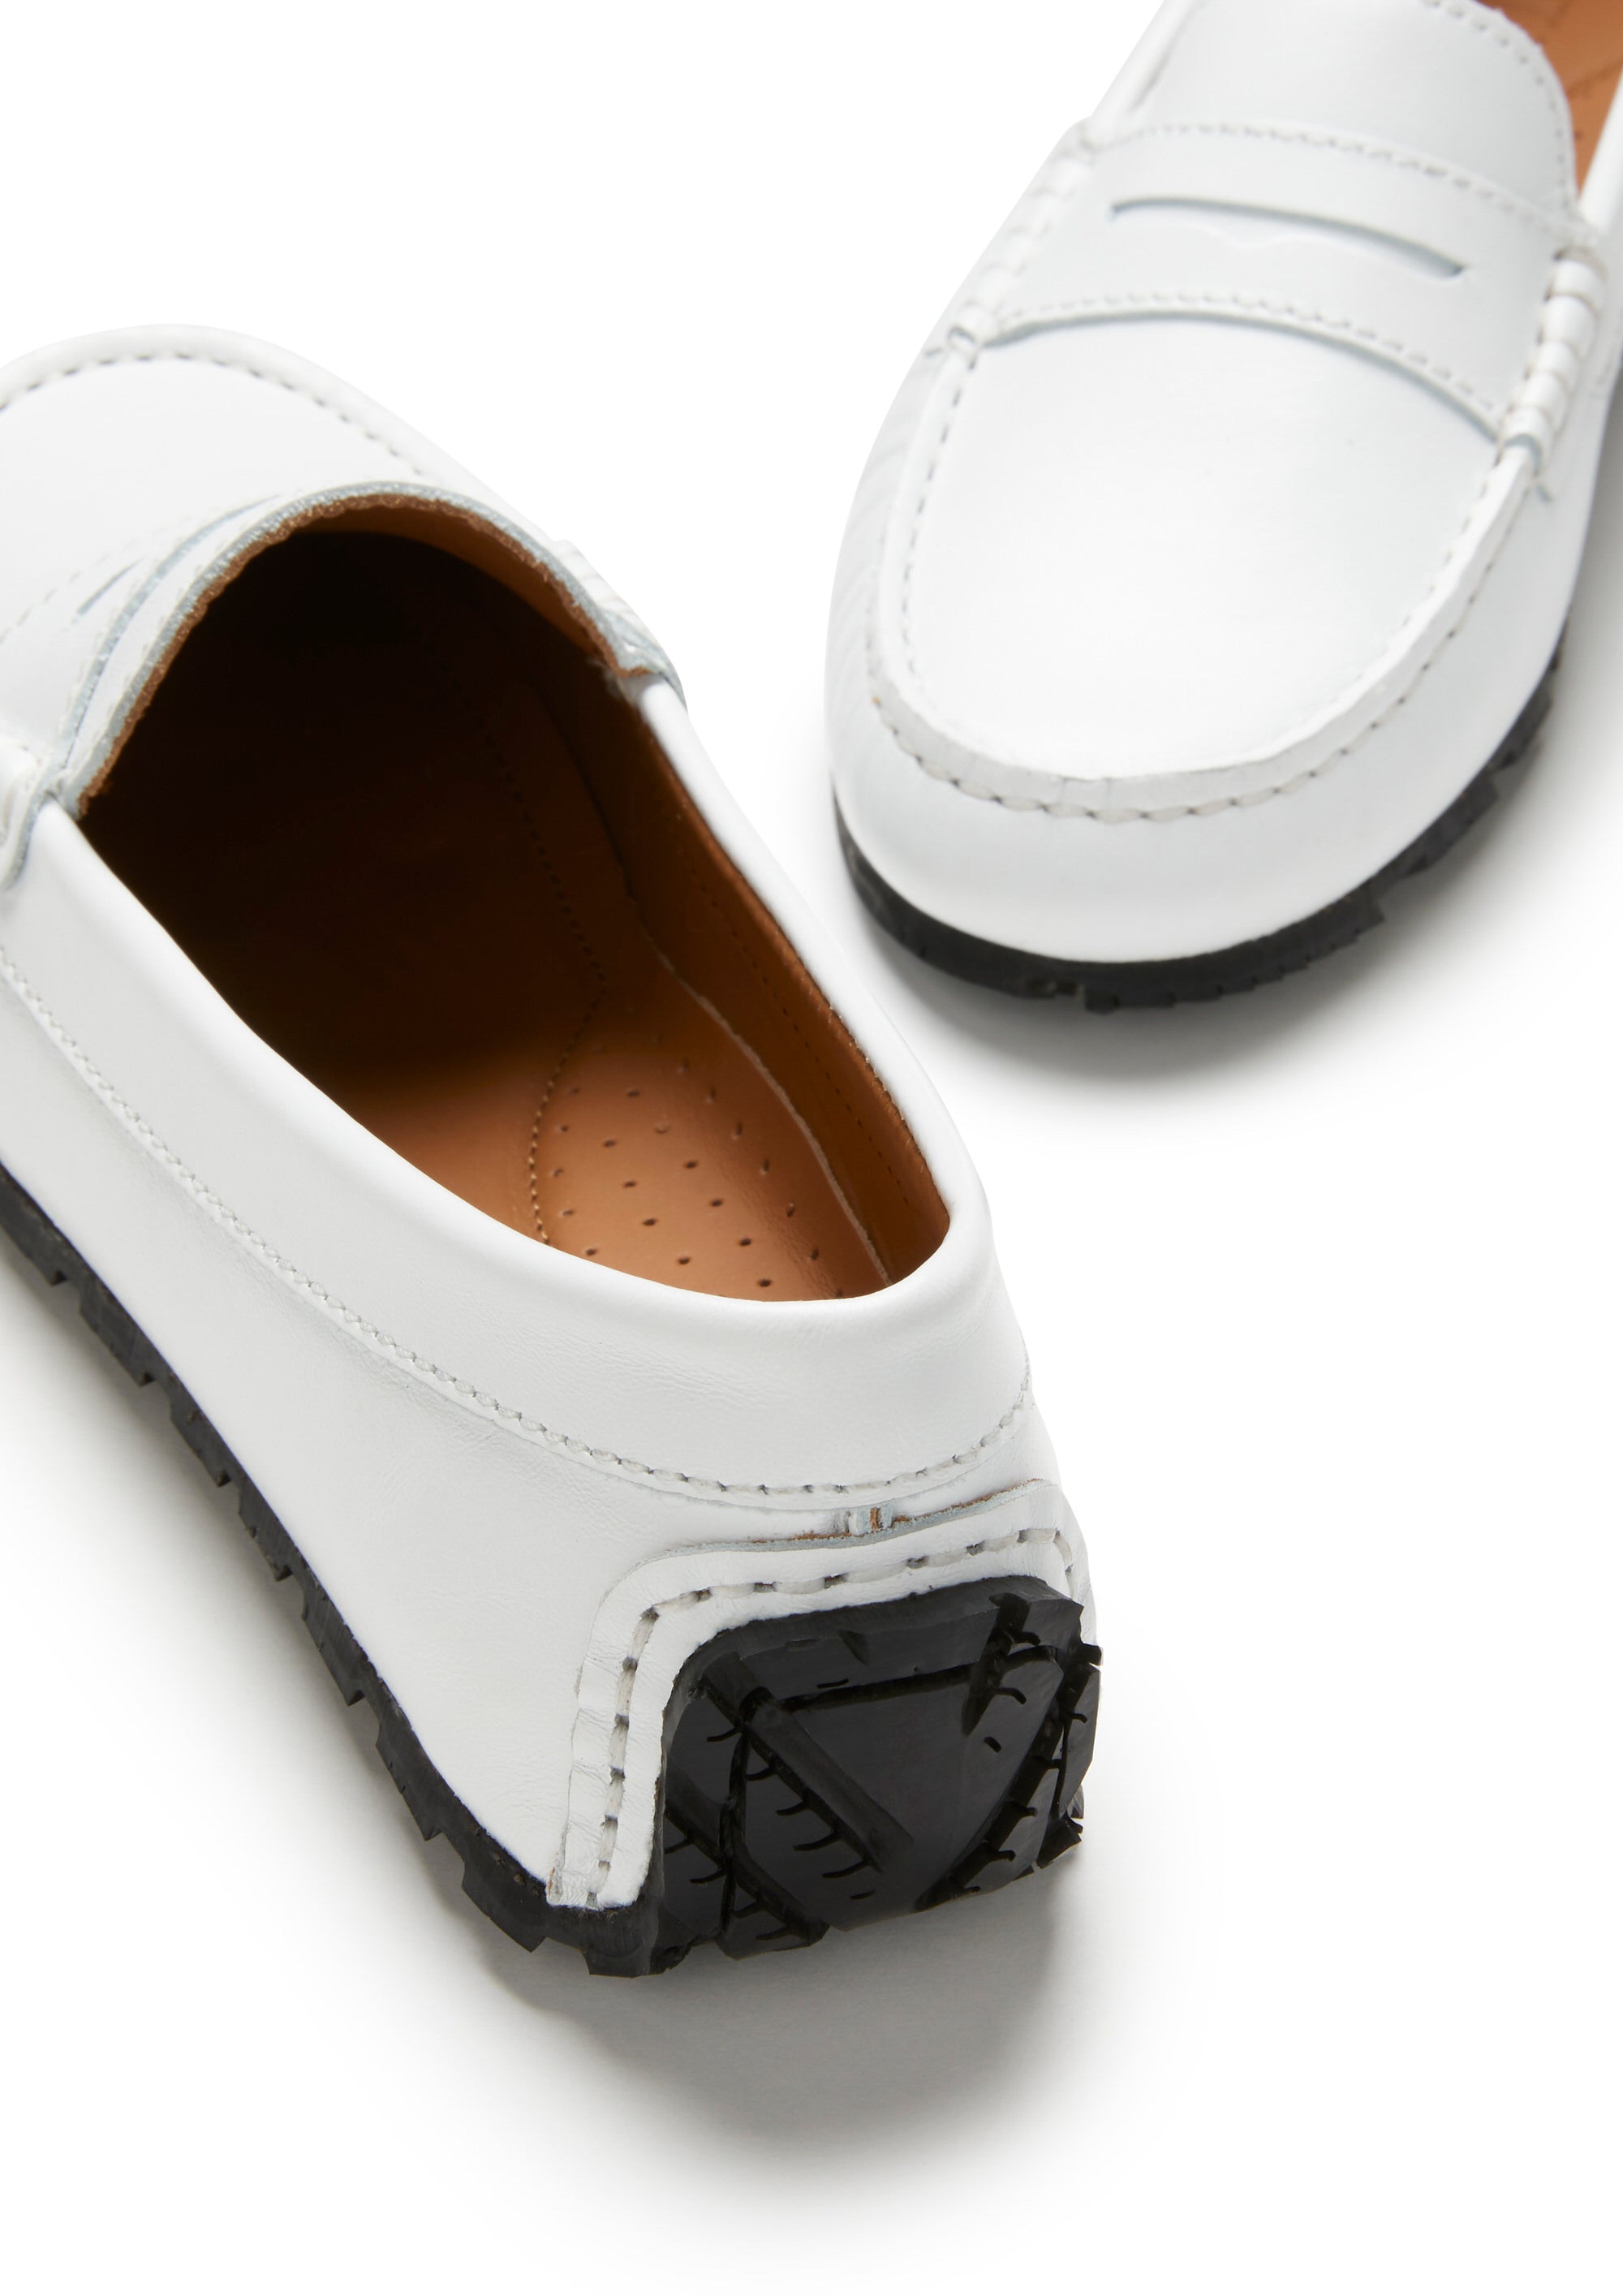 Women's Tyre Sole Penny Loafers, white leather